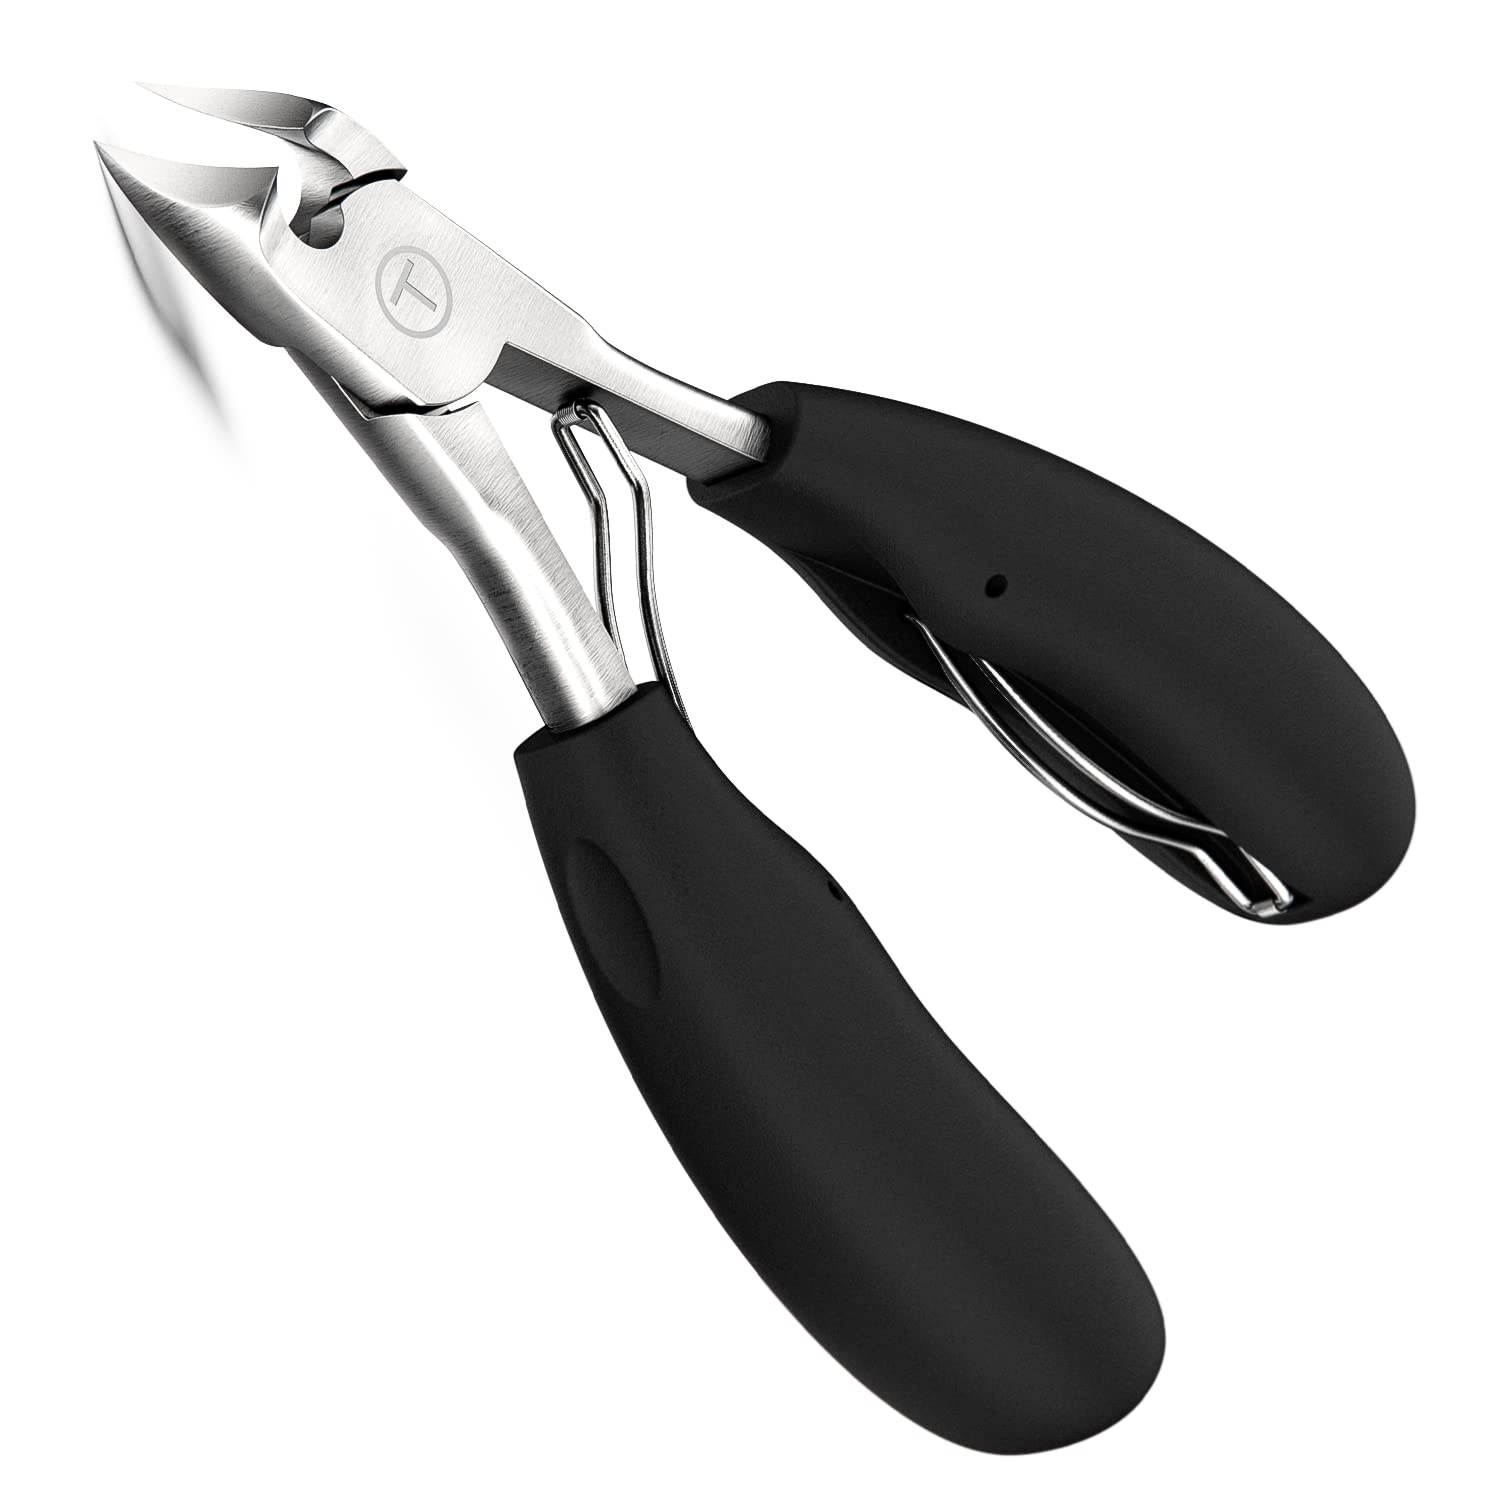 Majestique Nail Cutter Set with Comfort Grip Stainless Steel, Manicure  Pedicure Finger & Toe Nail Care, Nail File Sharp Nail Cutter for Men and  Women (Color May Very)--FN315_FN323_FN310